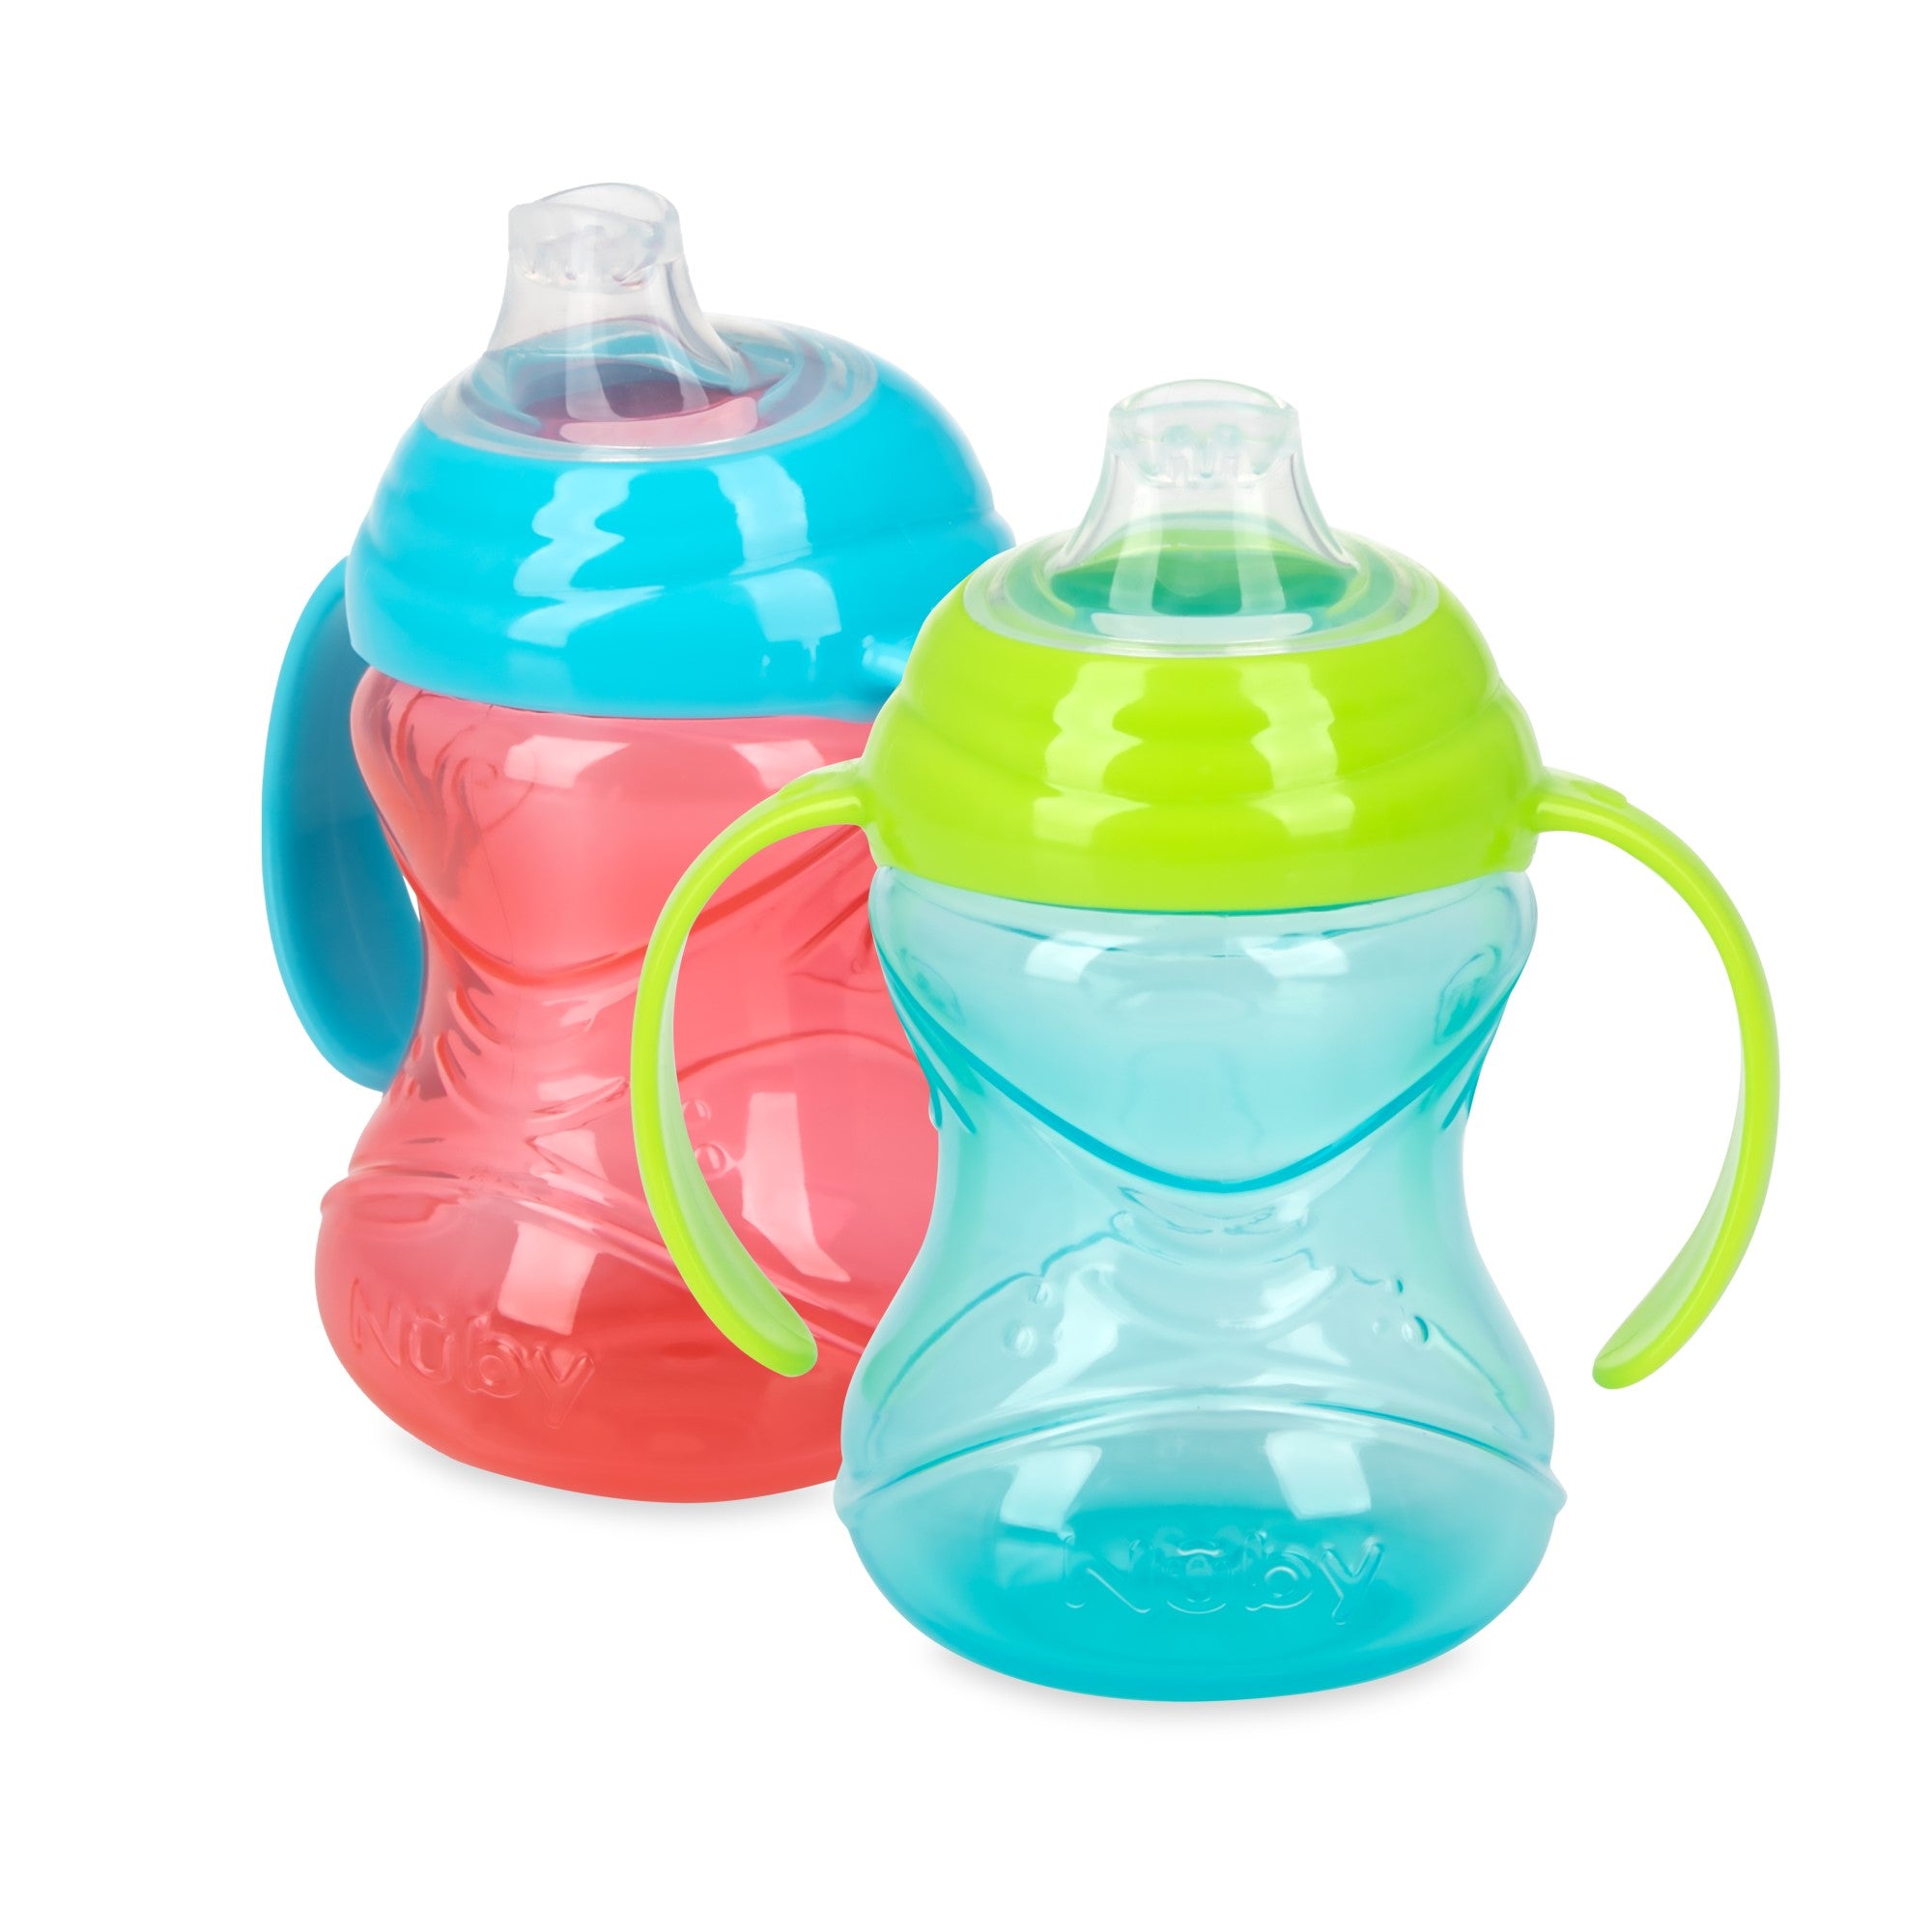 Nalgene Colby Sippy Cup